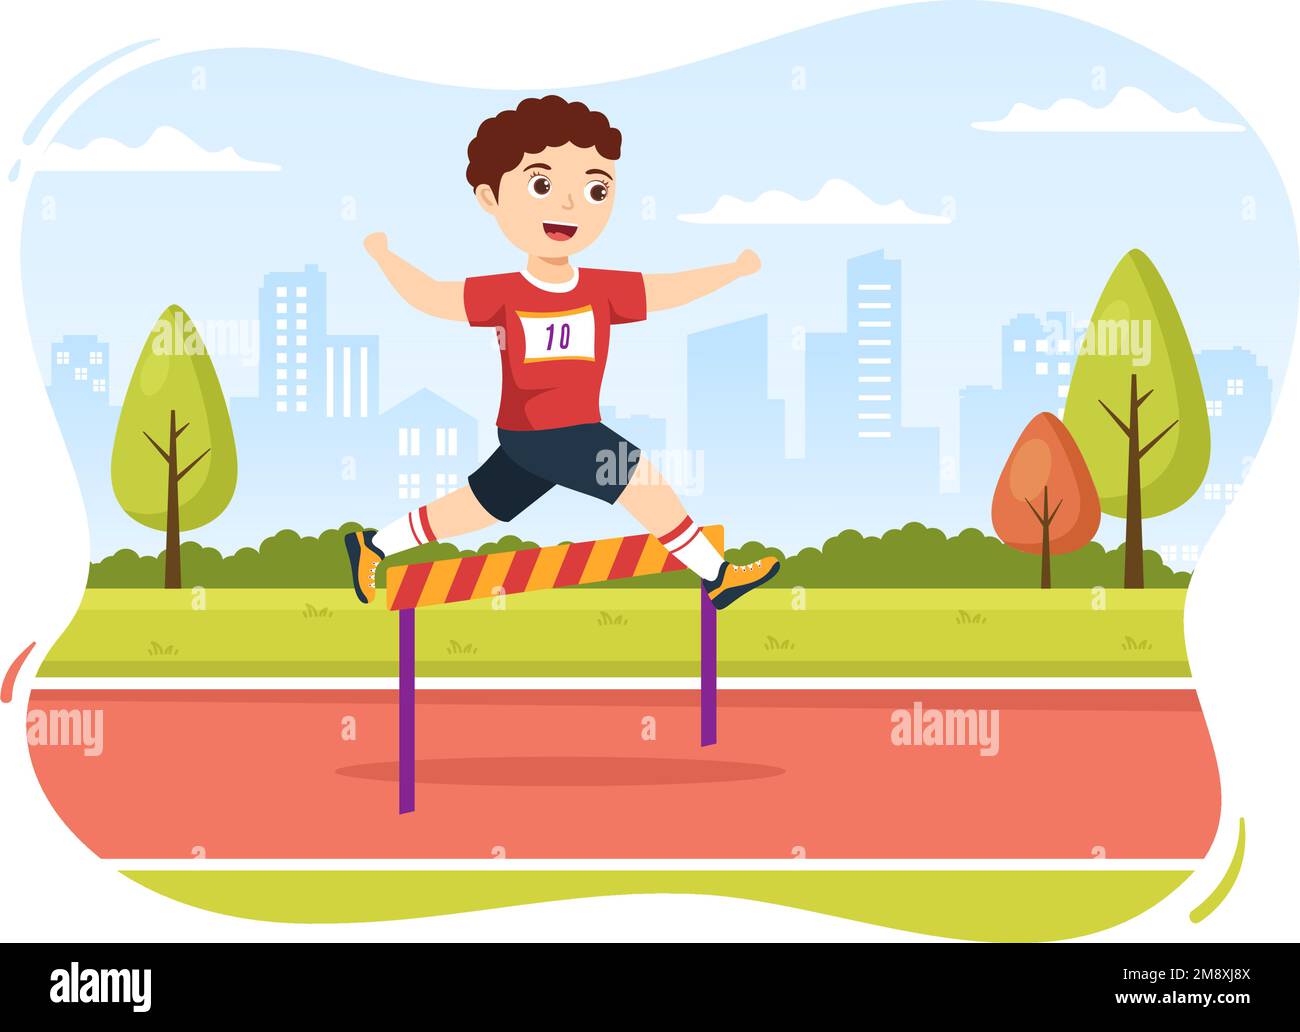 Kids Athlete Run Hurdle Long Jump Sportsman Game Illustration in Obstacle Running for Web Banner or Landing Page in Cartoon Hand Drawn Templates Stock Vector